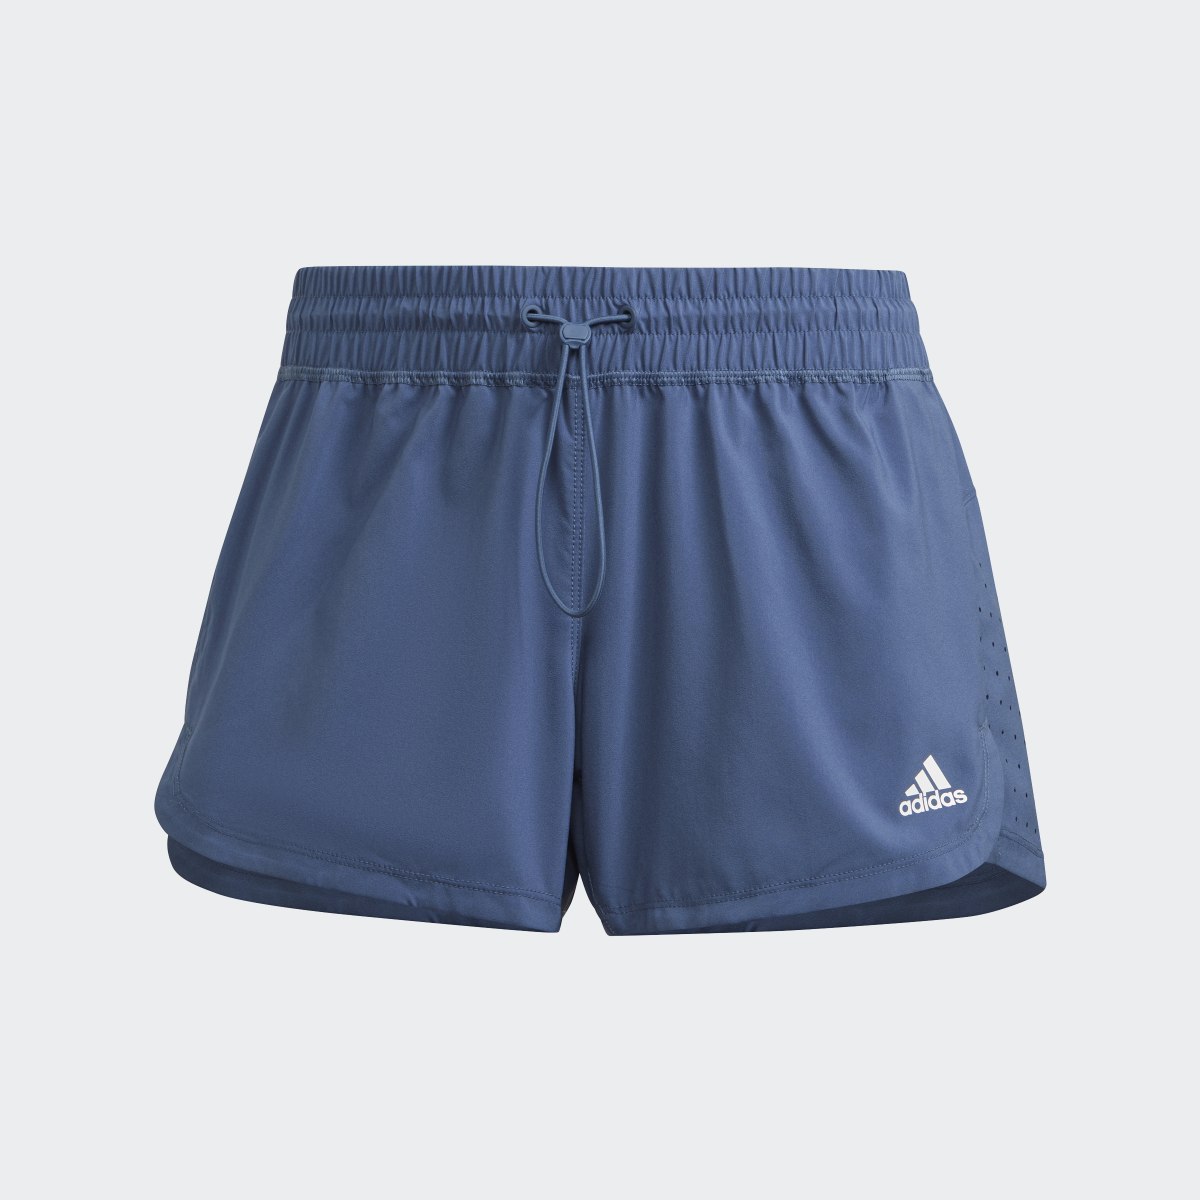 Adidas Perforated Pacer Shorts. 4